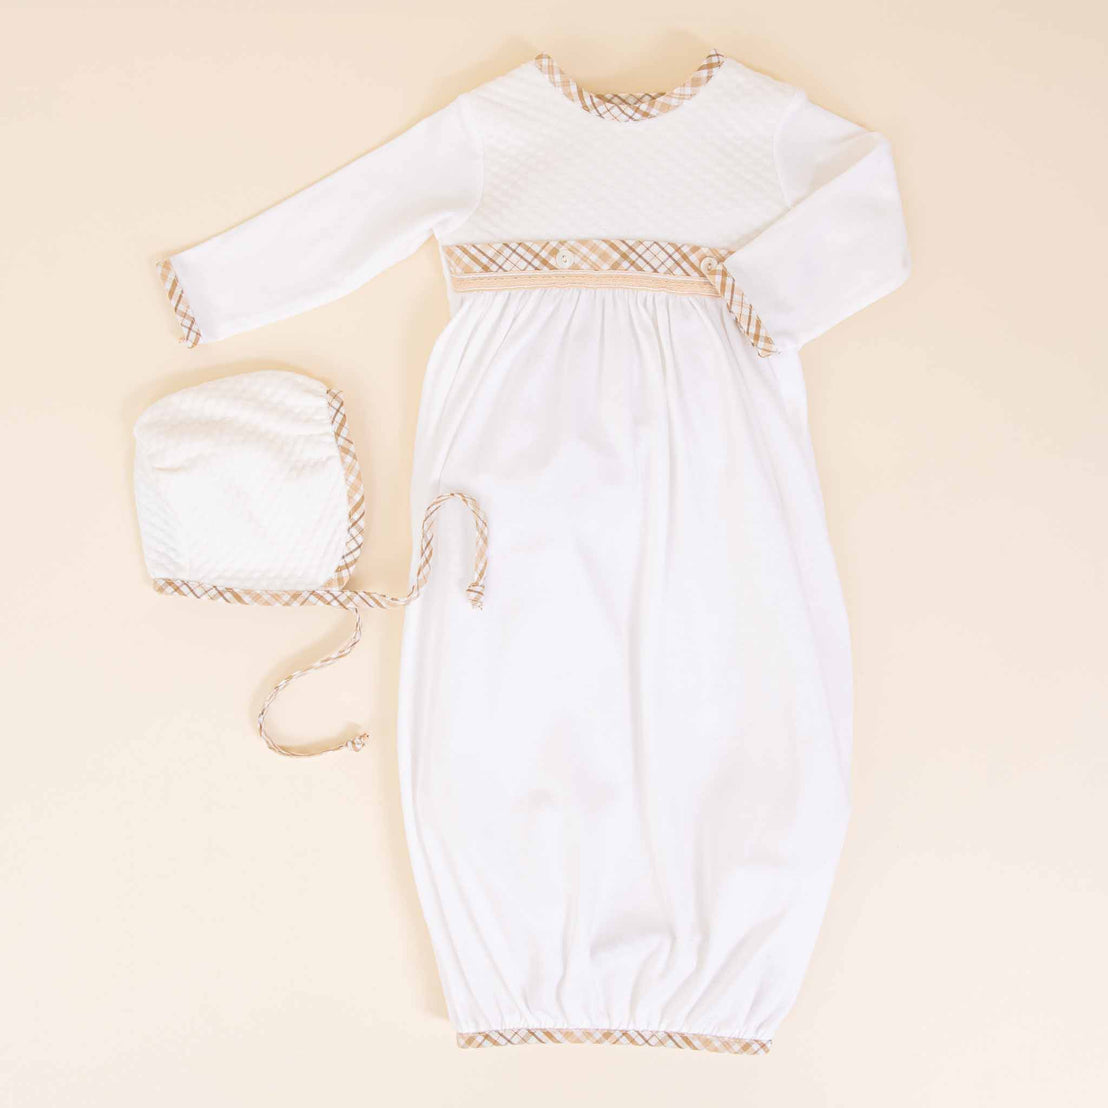 Dylan Newborn Gift Set christening garments with delicate beige patterns on a collar, waistband, and cuffs, paired with a matching bonnet, displayed on a soft beige background.